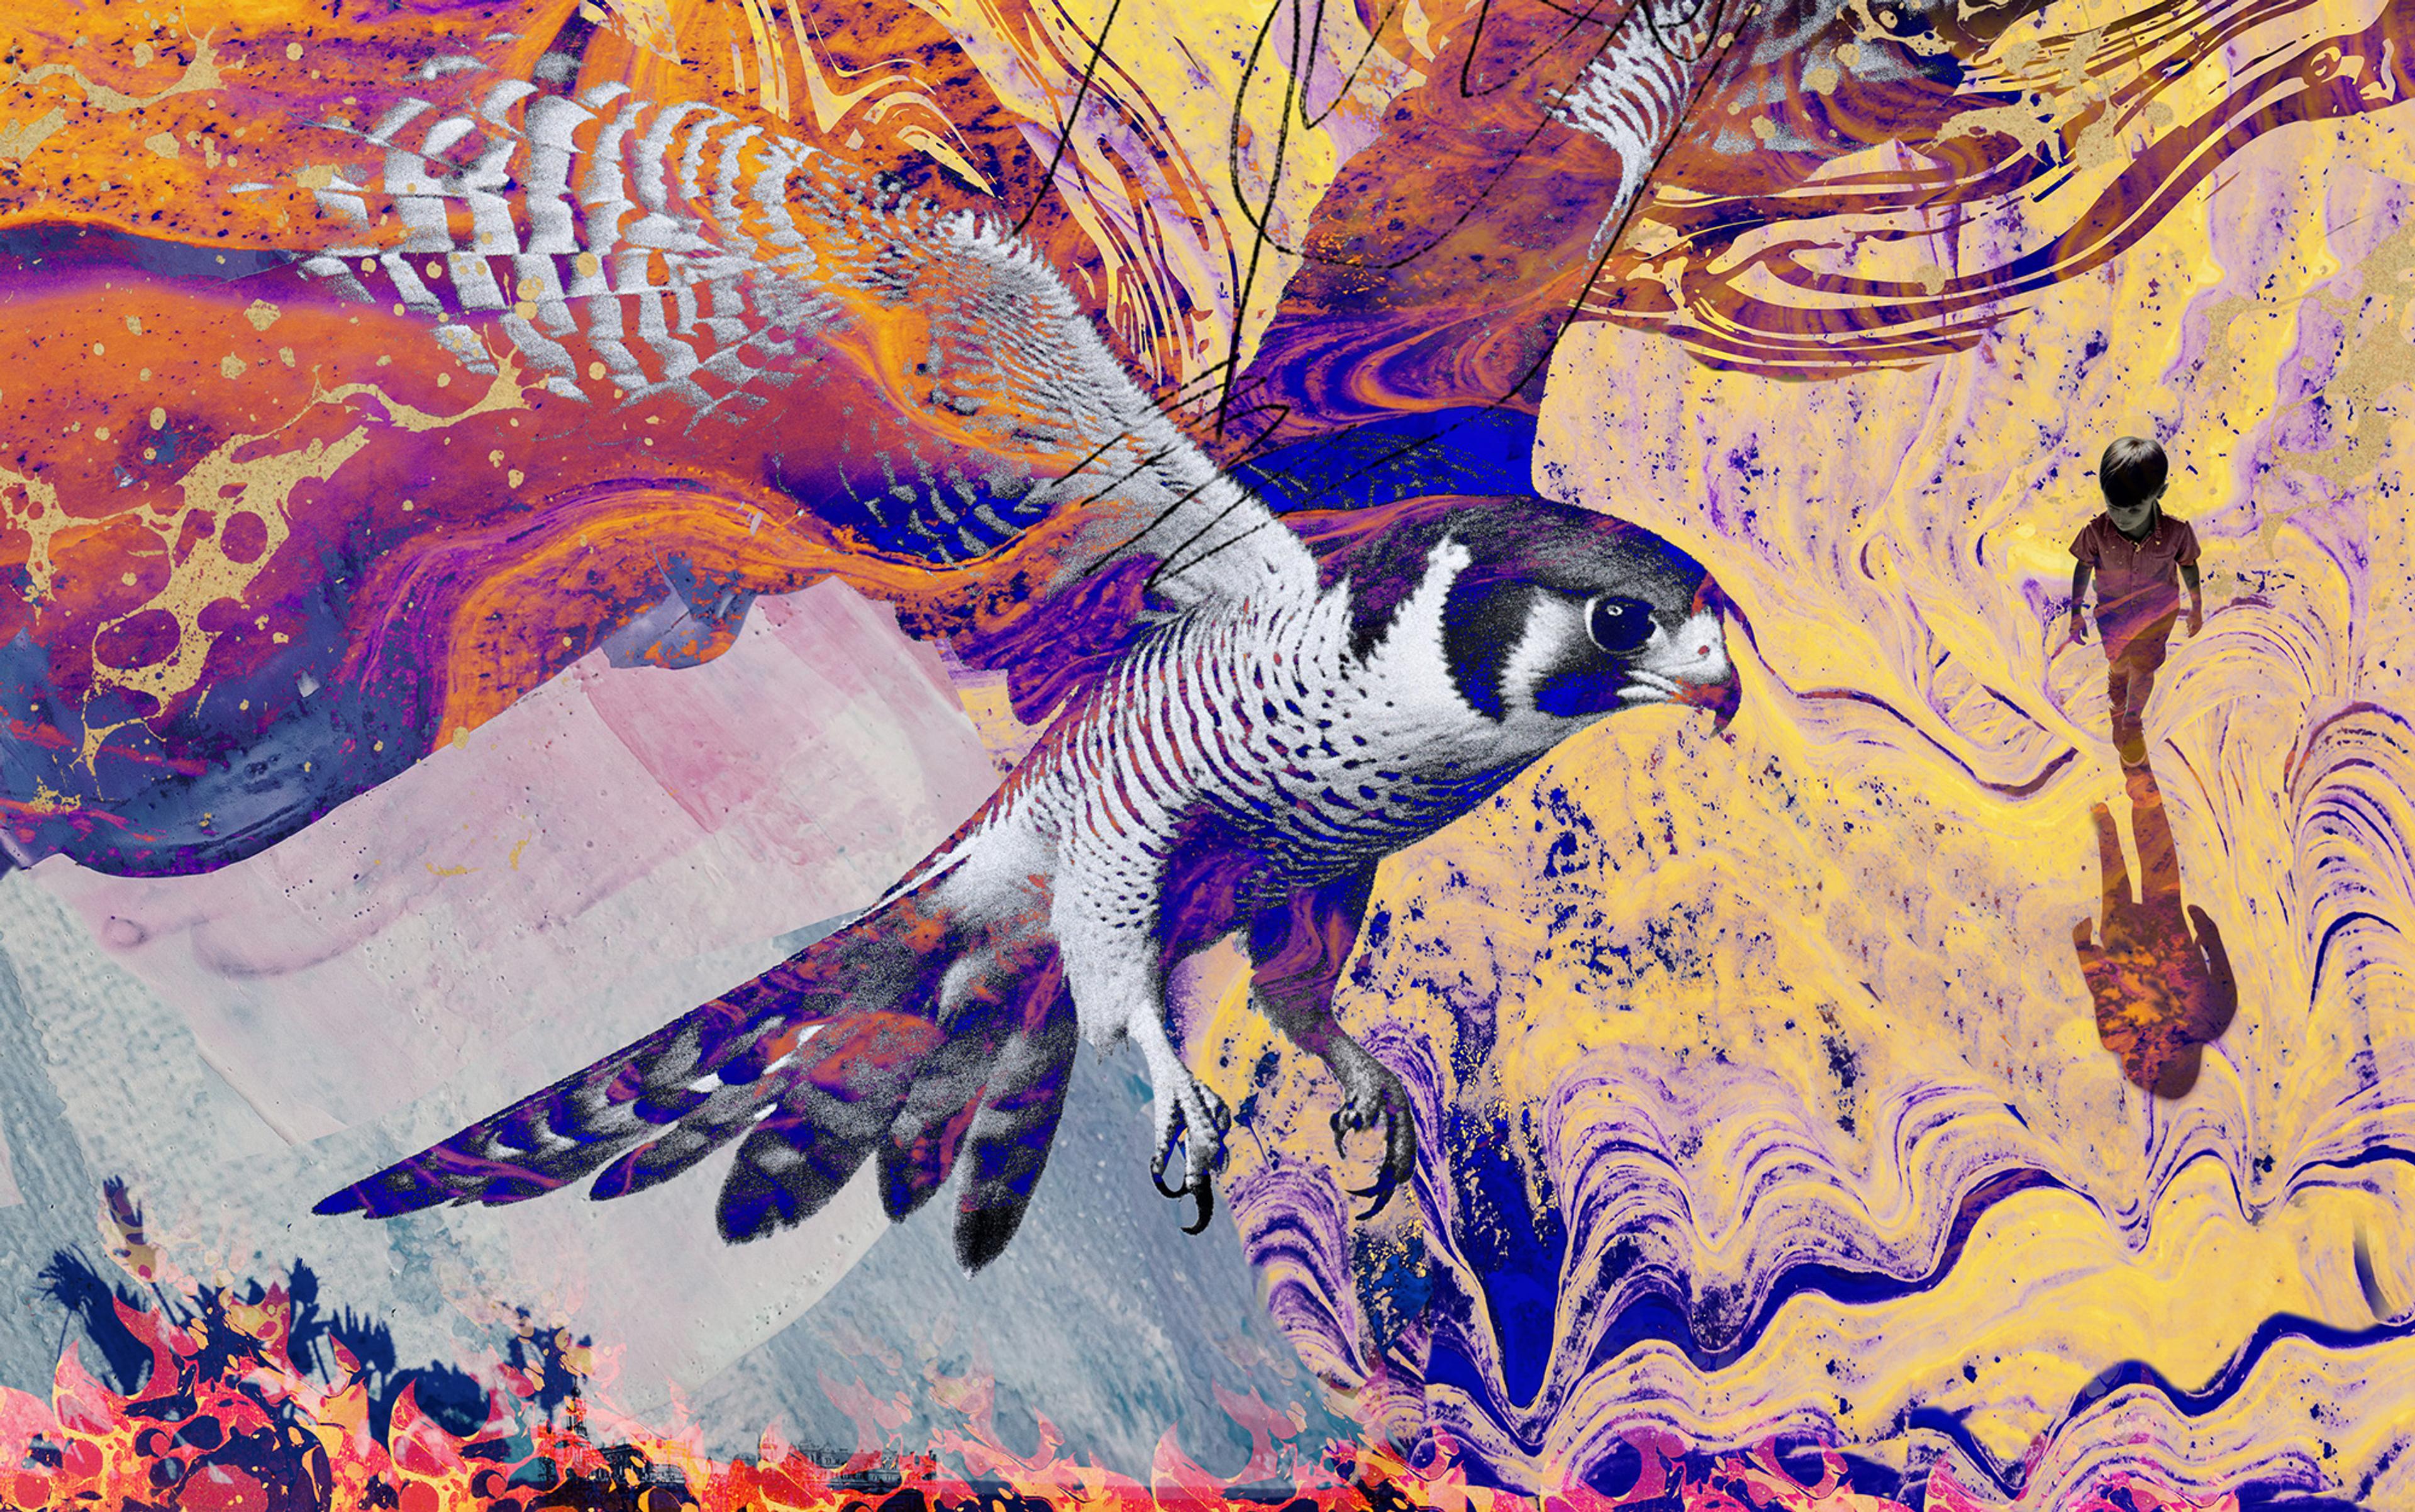 A colourful, abstract image featuring a large, black and white bird in flight. The background is a swirling mix of purple, orange, and yellow hues. A small figure of a child walks in the distance, casting a long shadow.